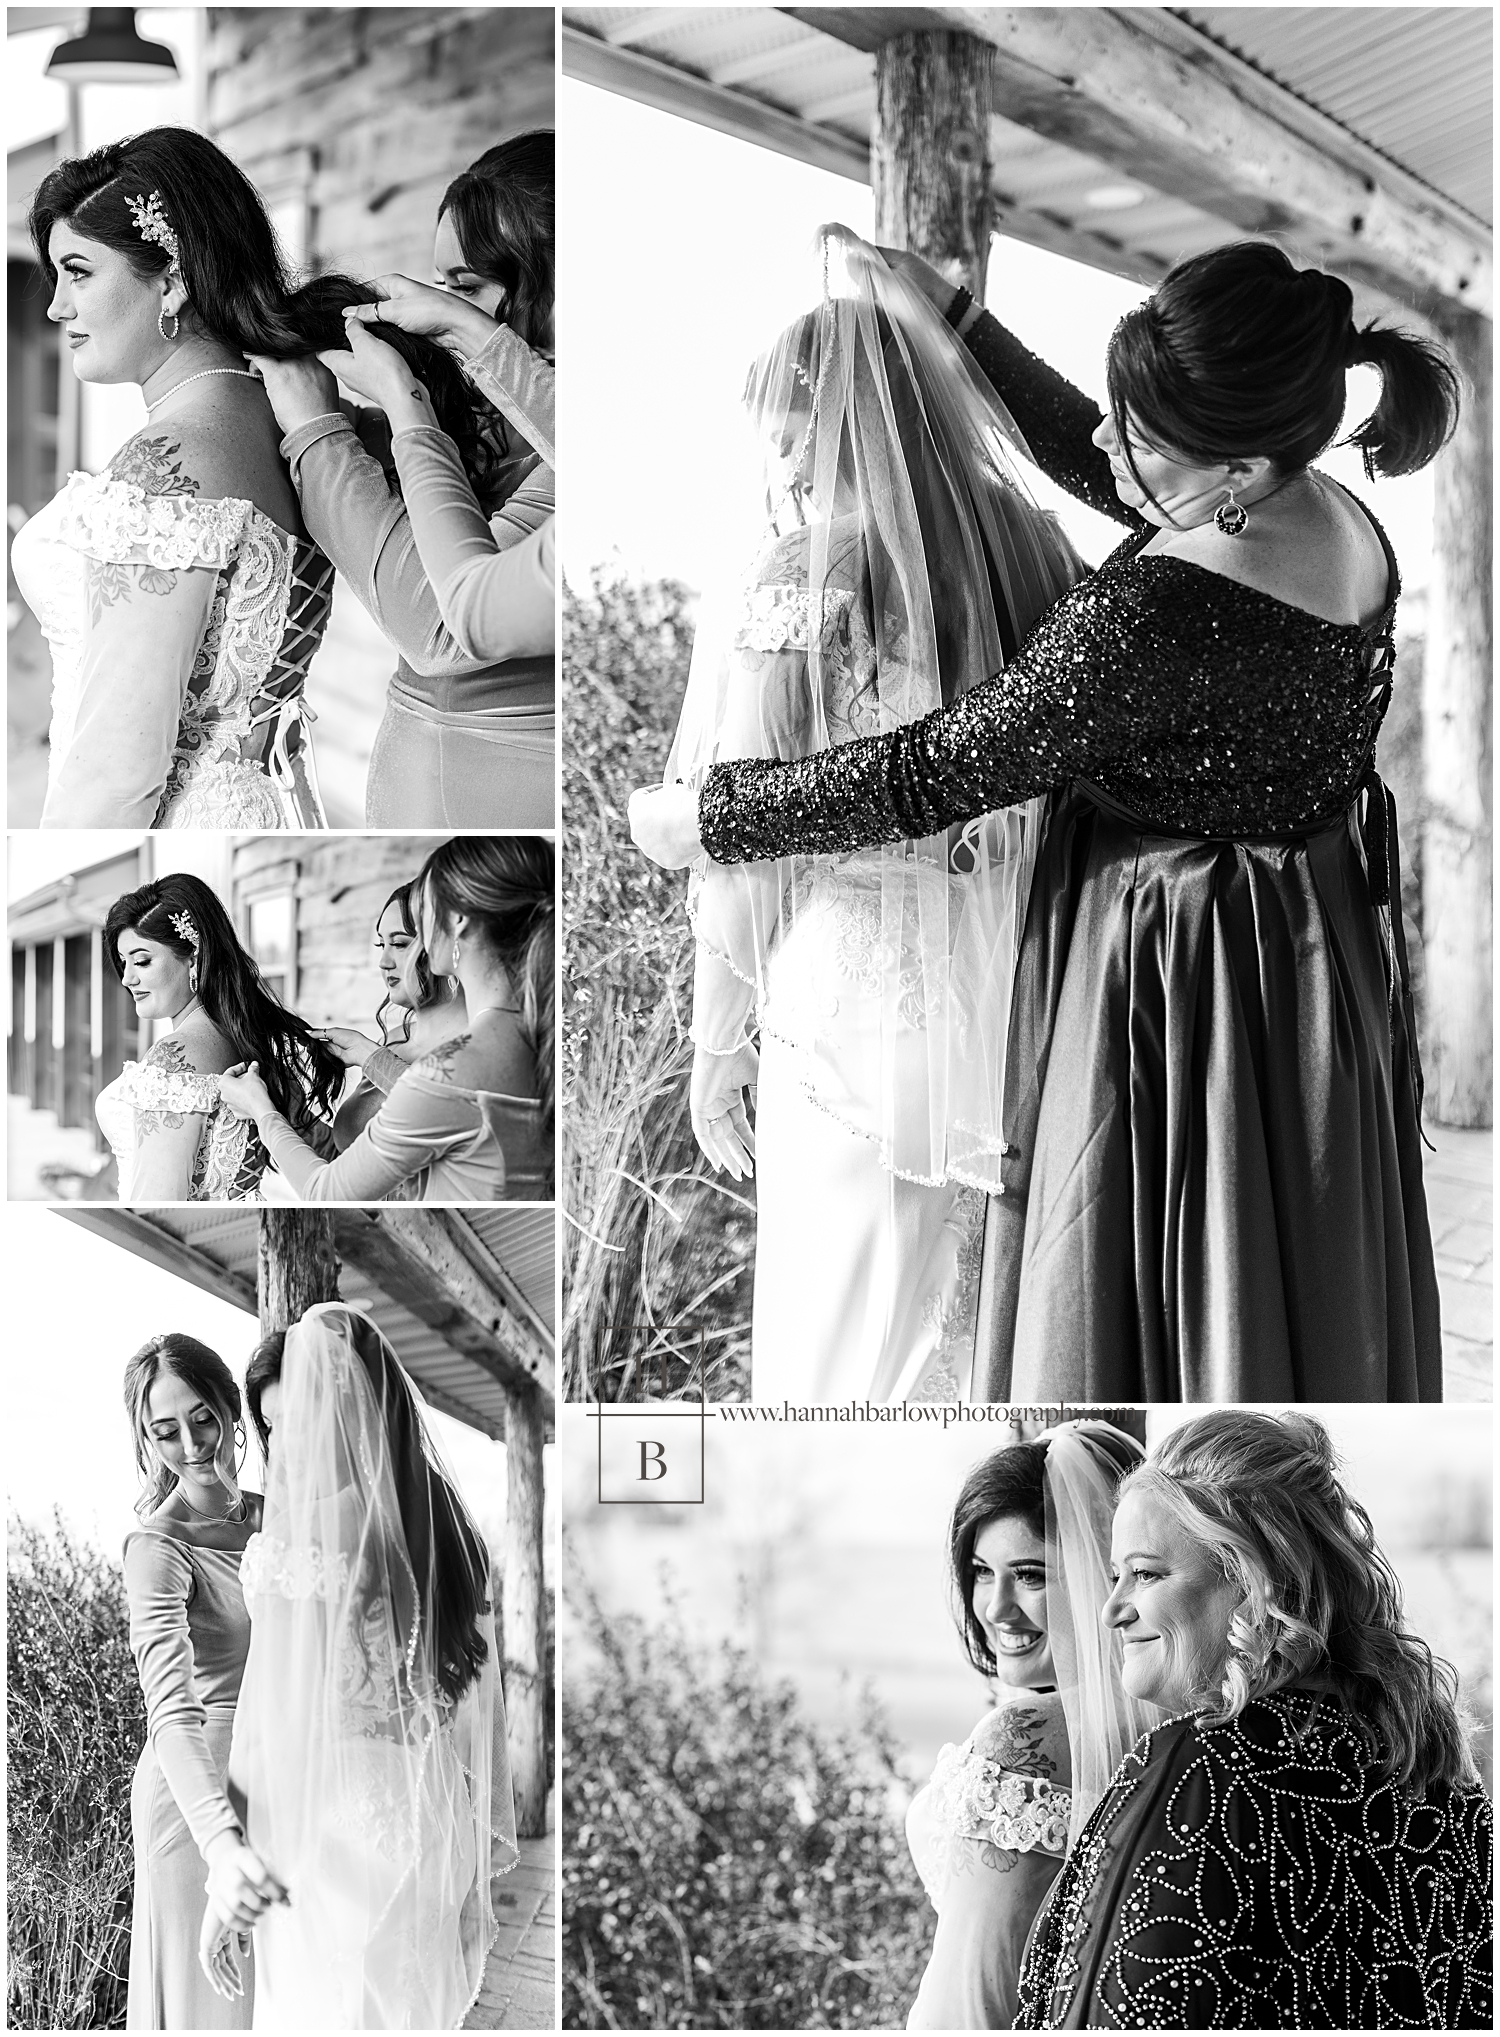 Black and white photos of Brad getting dress and veil on with help of friends in mother's